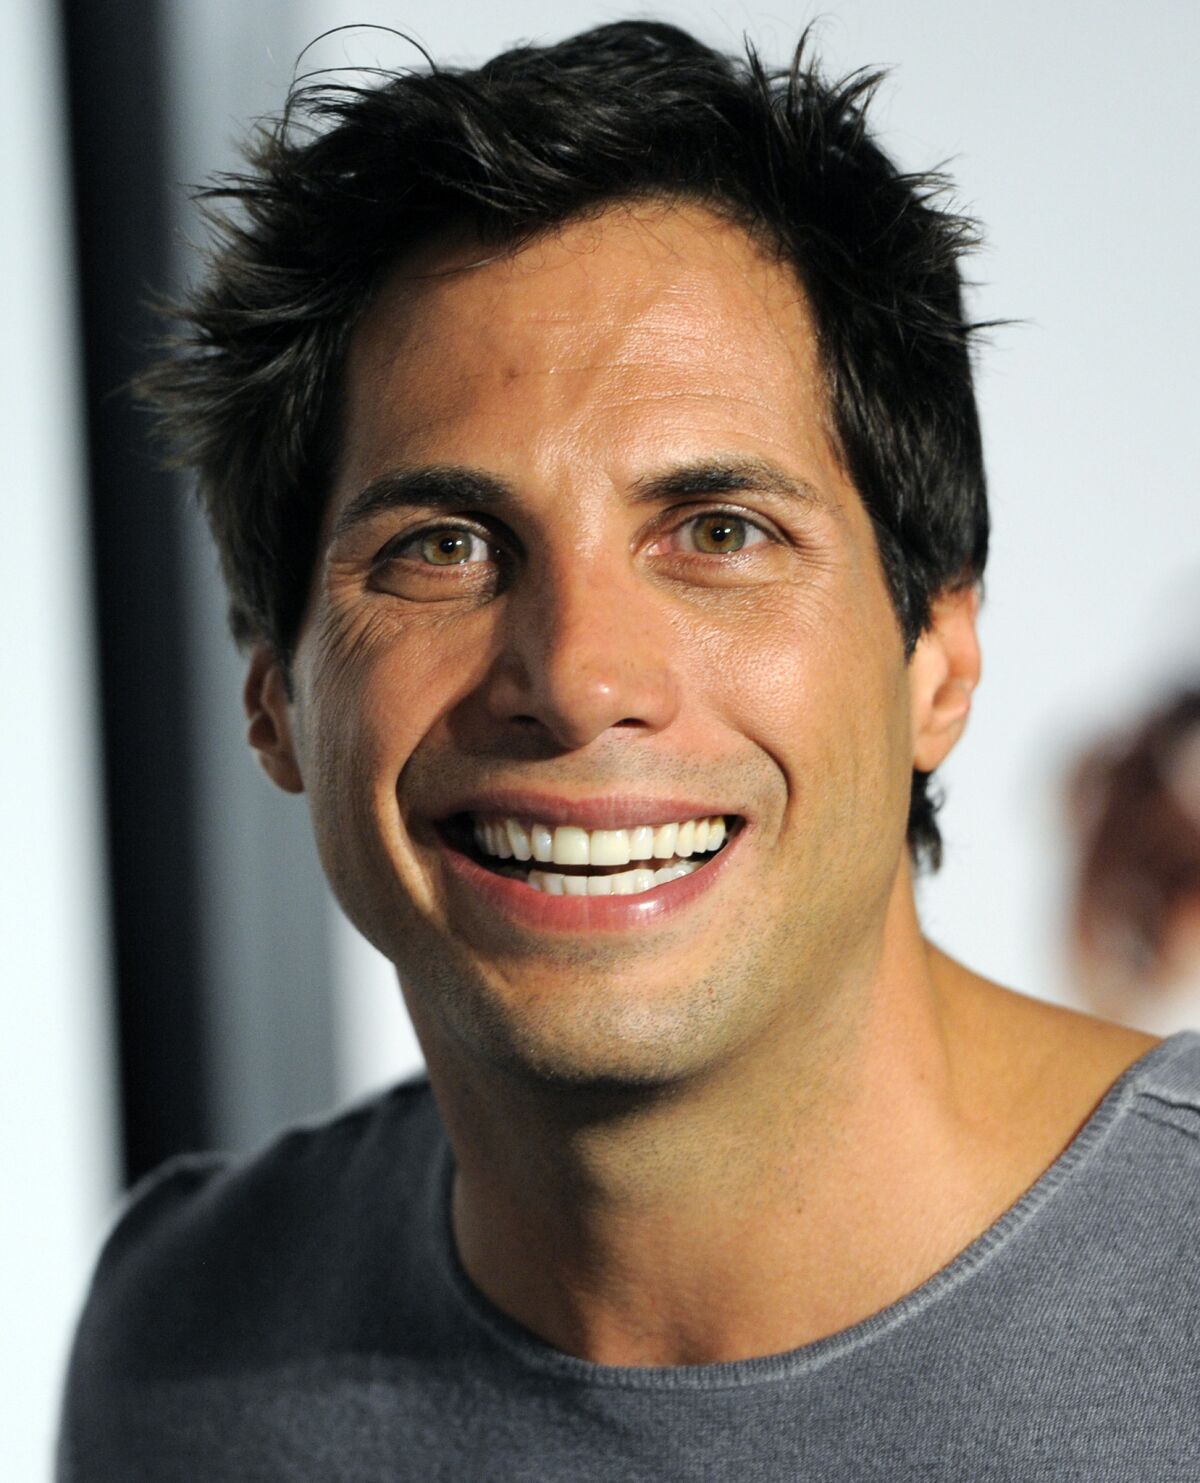 Joe Francis issued a statement saying his comments to the Hollywood Reporter "were hurtful and do not reflect my true feelings."